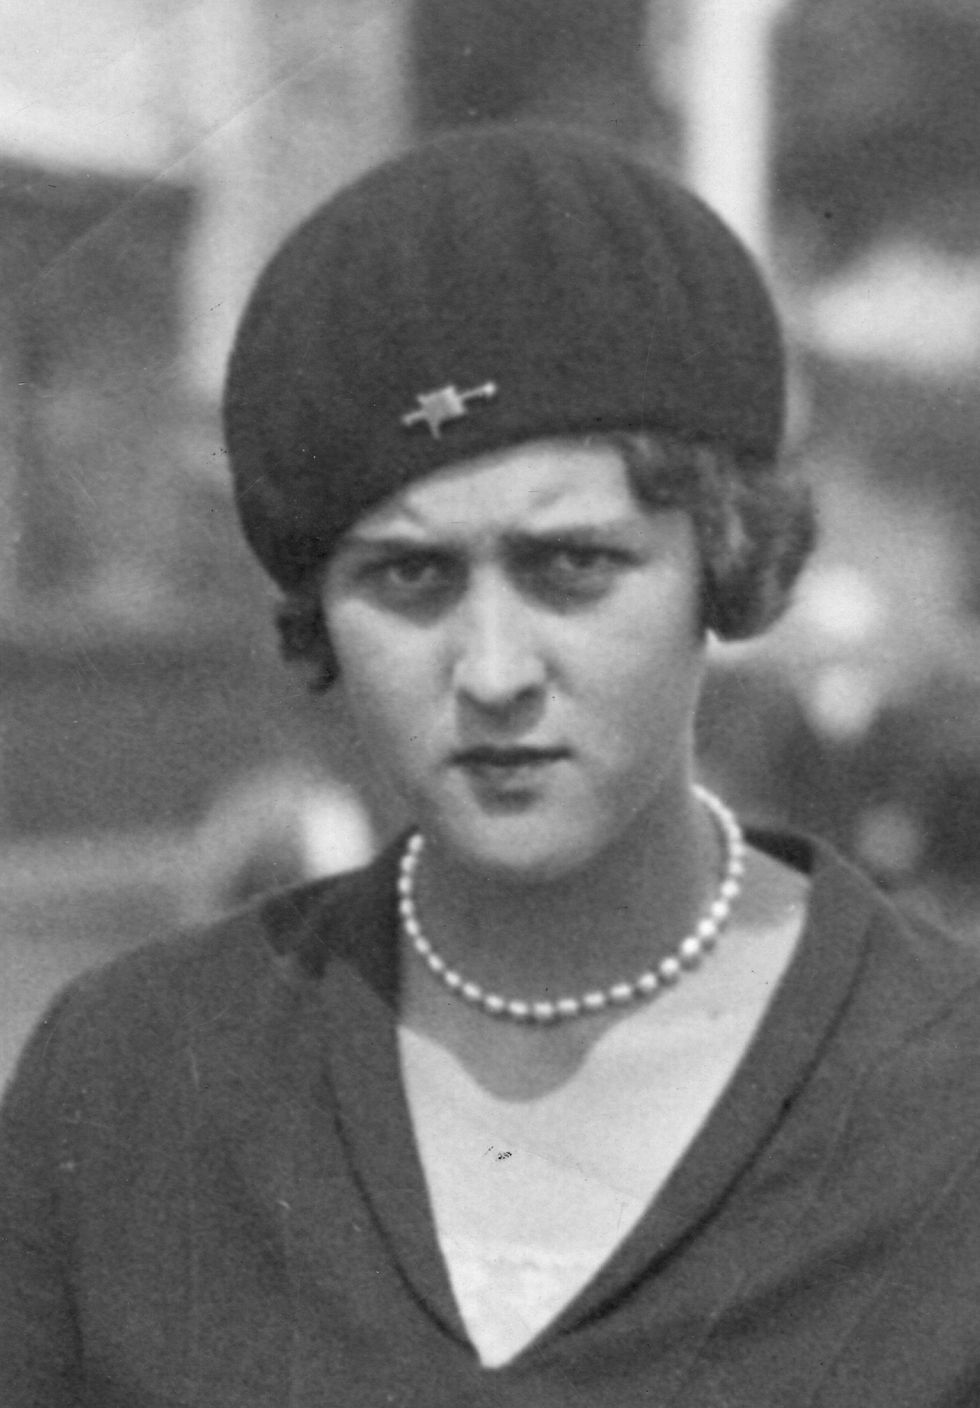 circa 1930  cecilia, grand duchess of hesse 1911   1937  she is the daughter of princess alice and prince andrew of greece, sister of the duke of edinburgh  photo by hulton archivegetty images